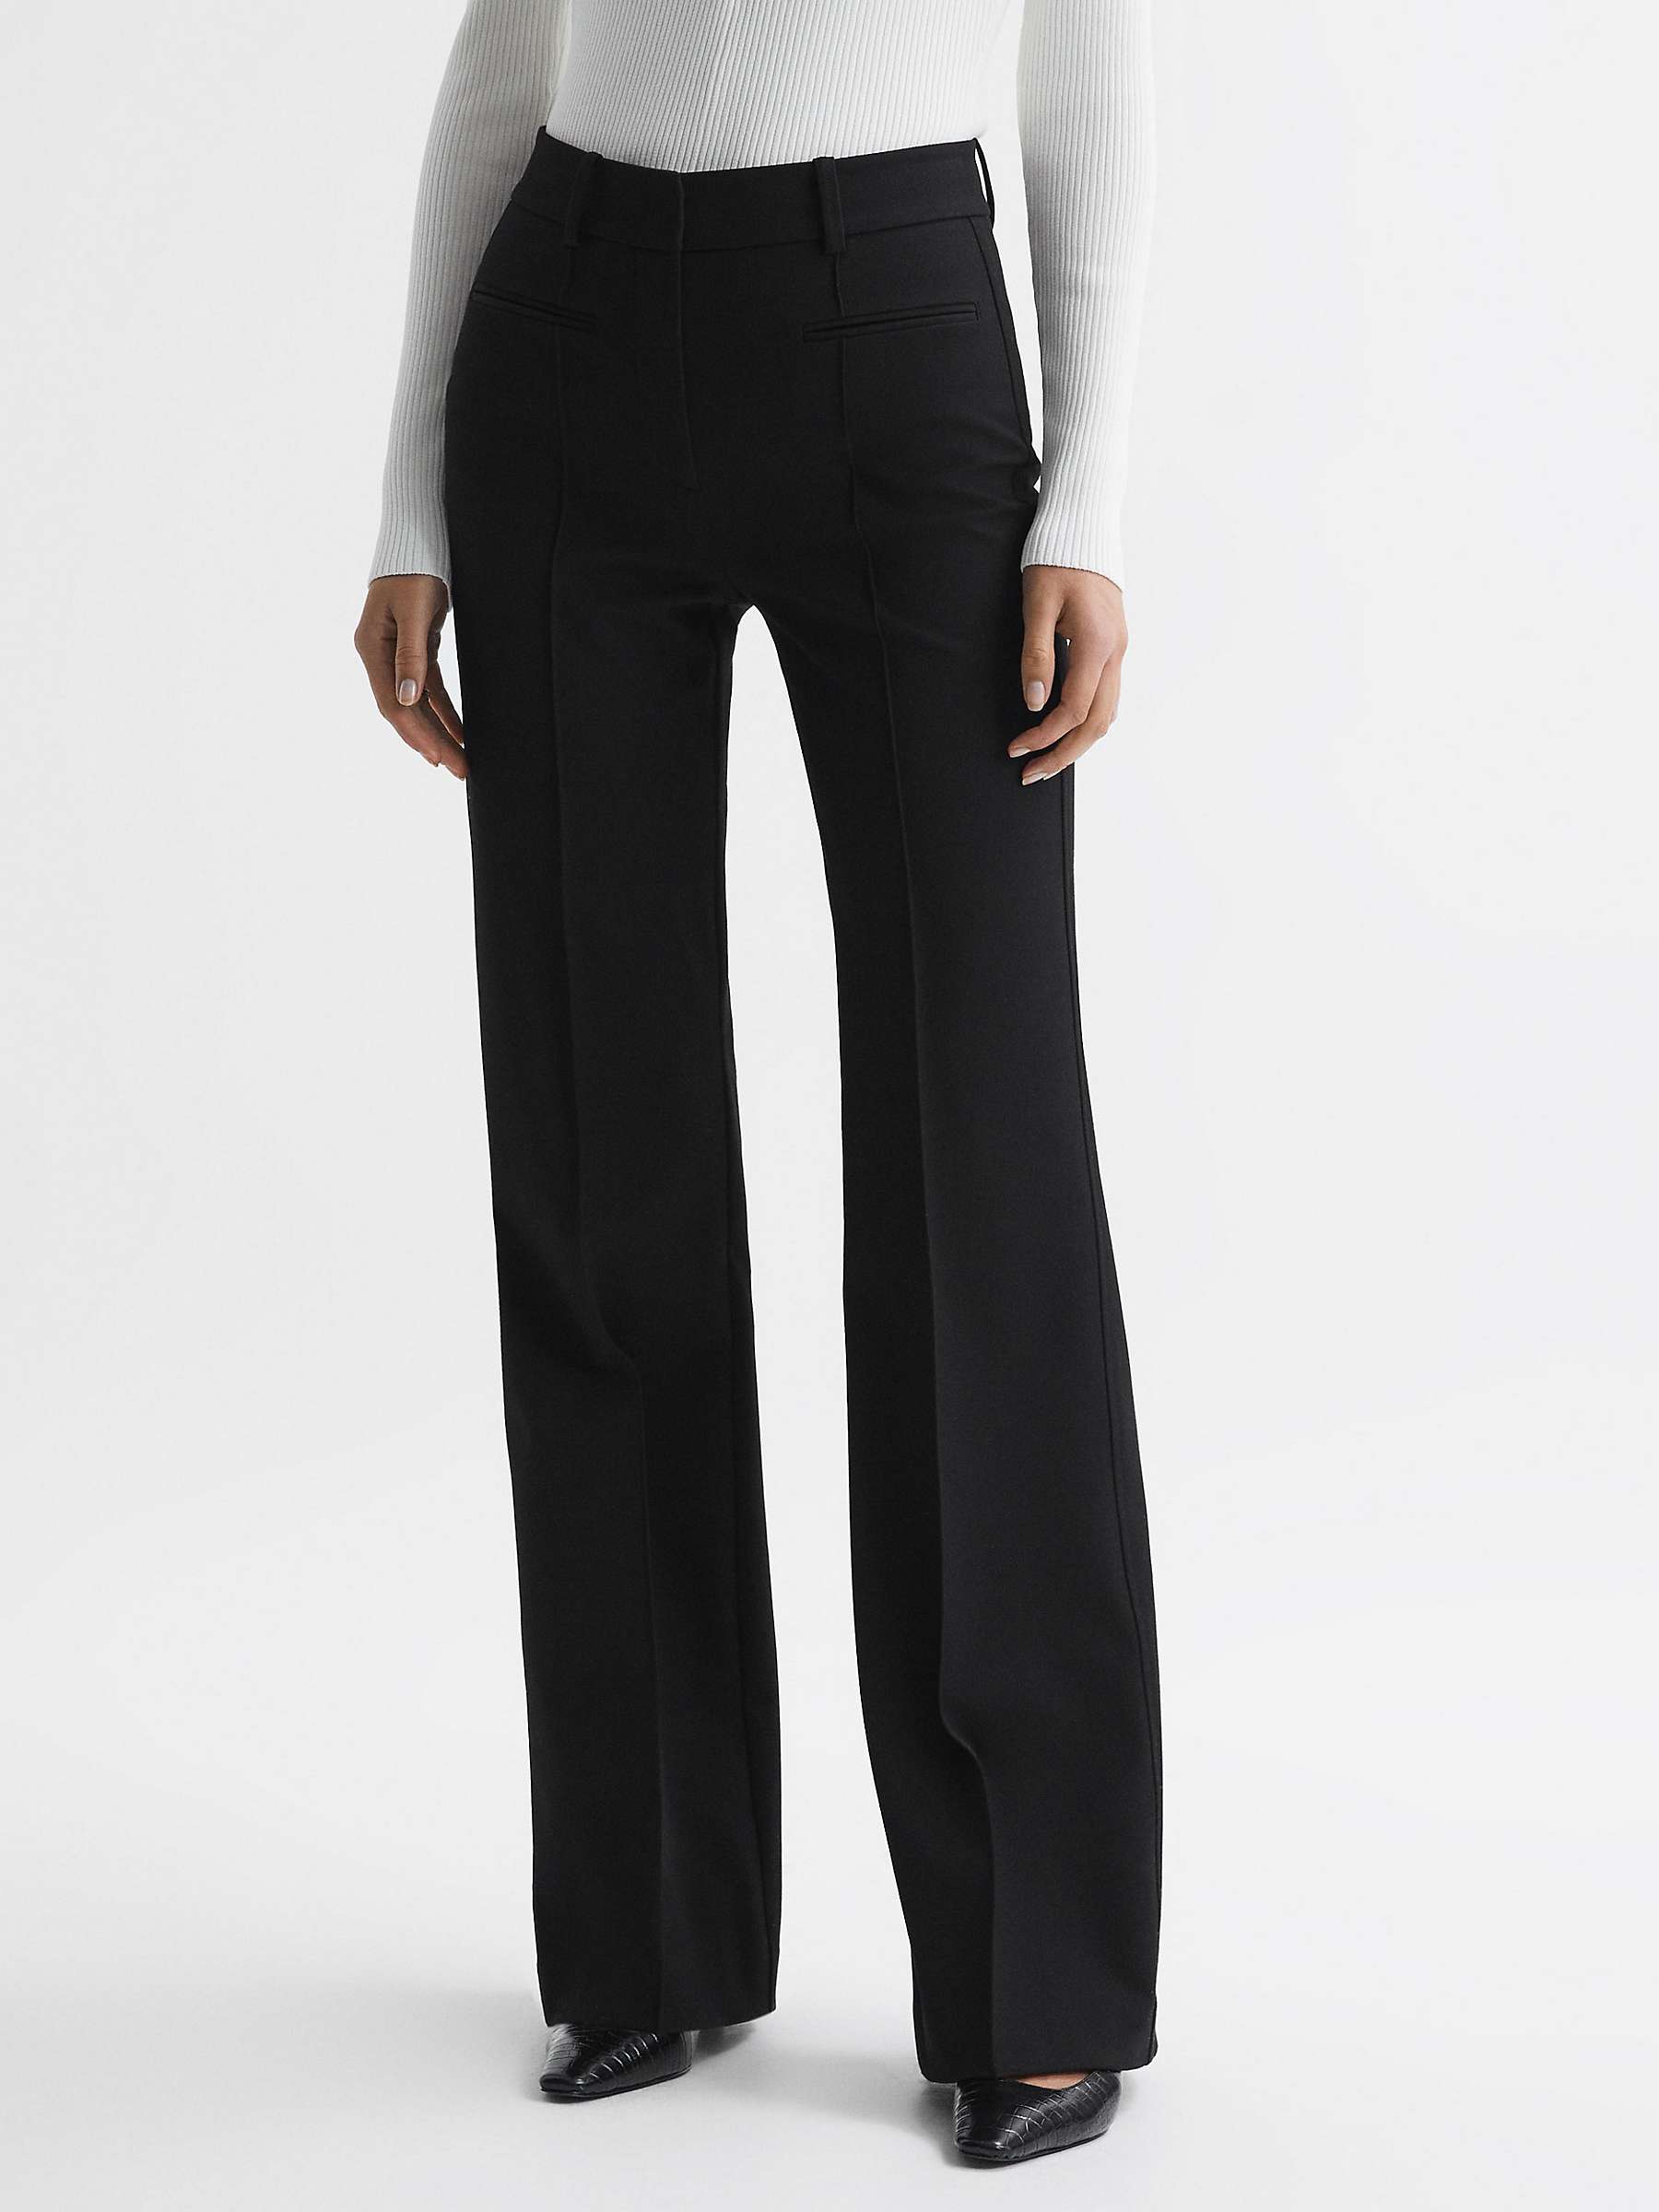 Buy Reiss Claude Flared Tailored Trousers, Black Online at johnlewis.com